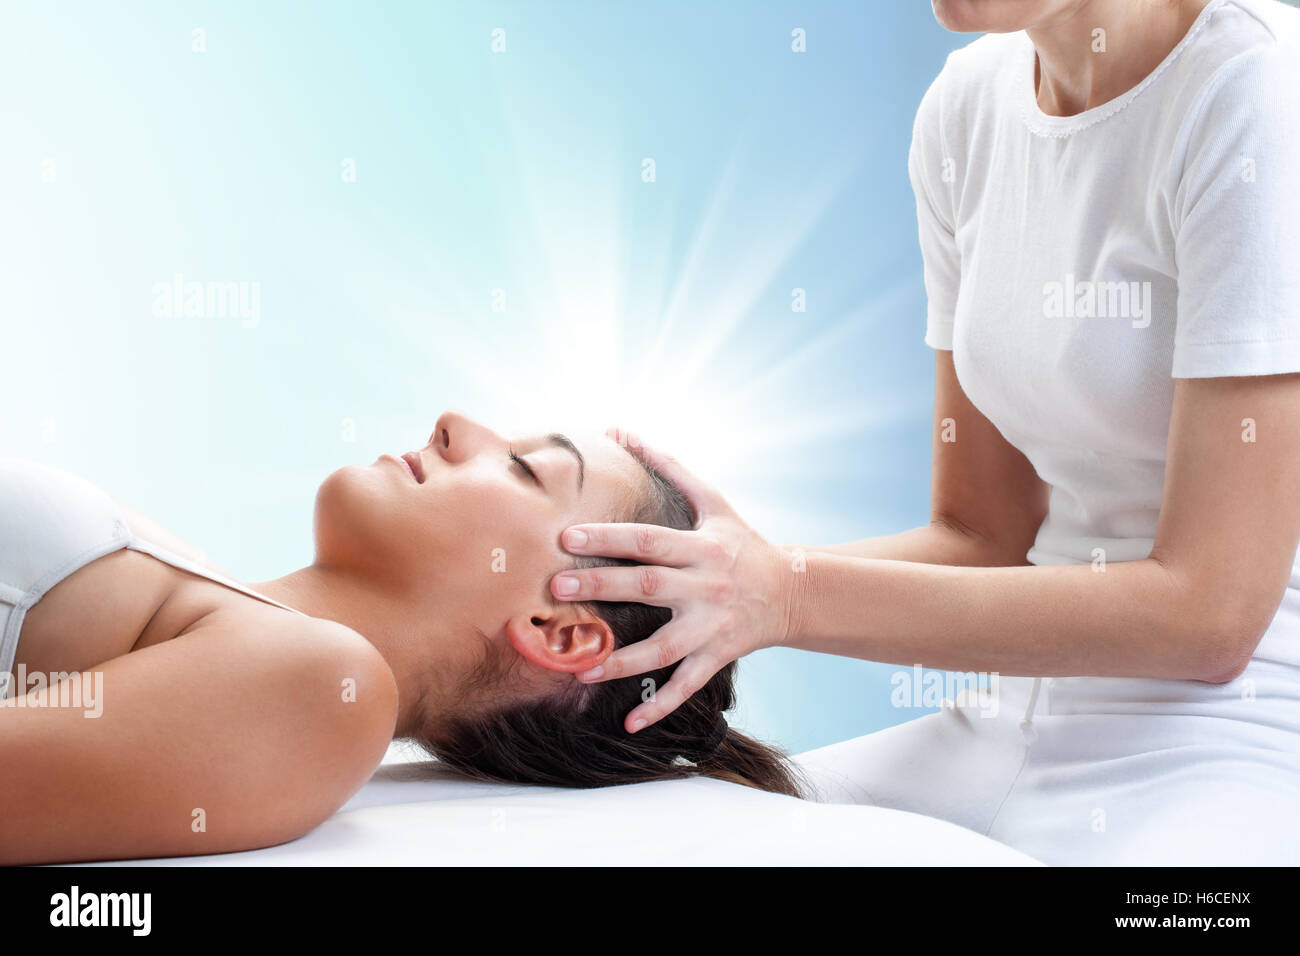 Close up portrait of therapist doing healing treatment on young woman.Therapist touching head with light glow in background. Stock Photo